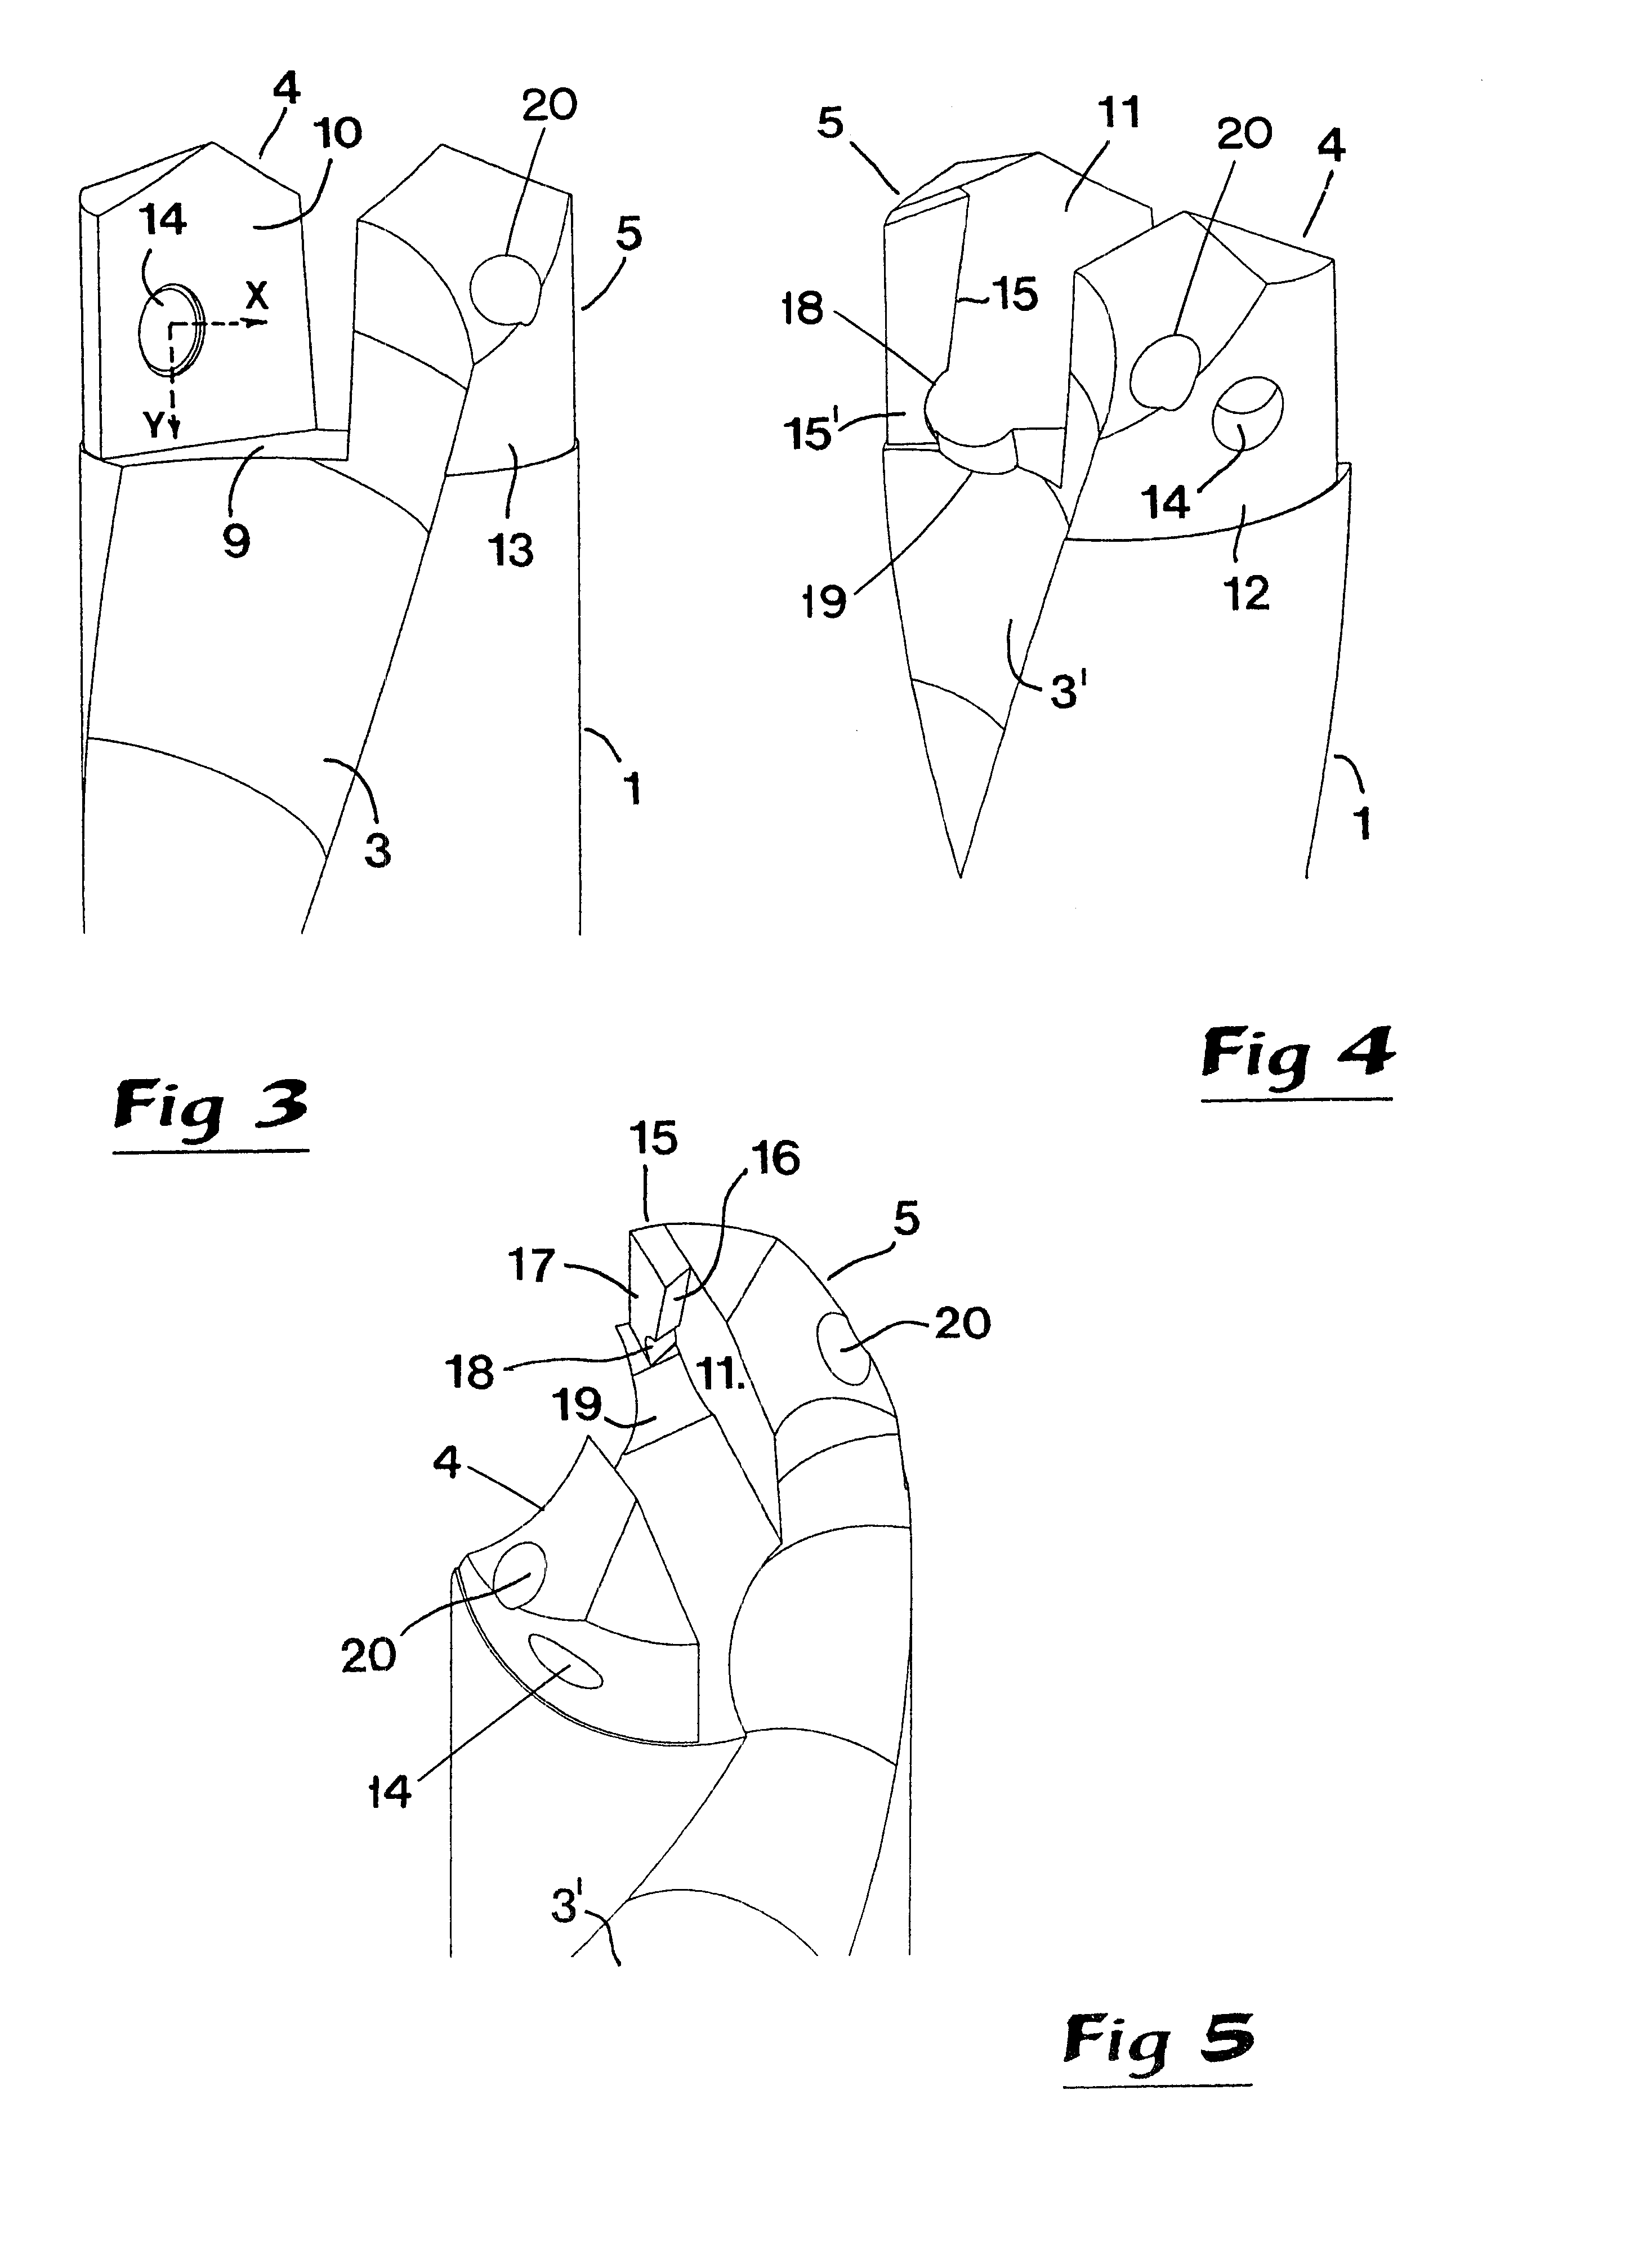 Drilling tool including a shank and a cutting body detachably secured thereto